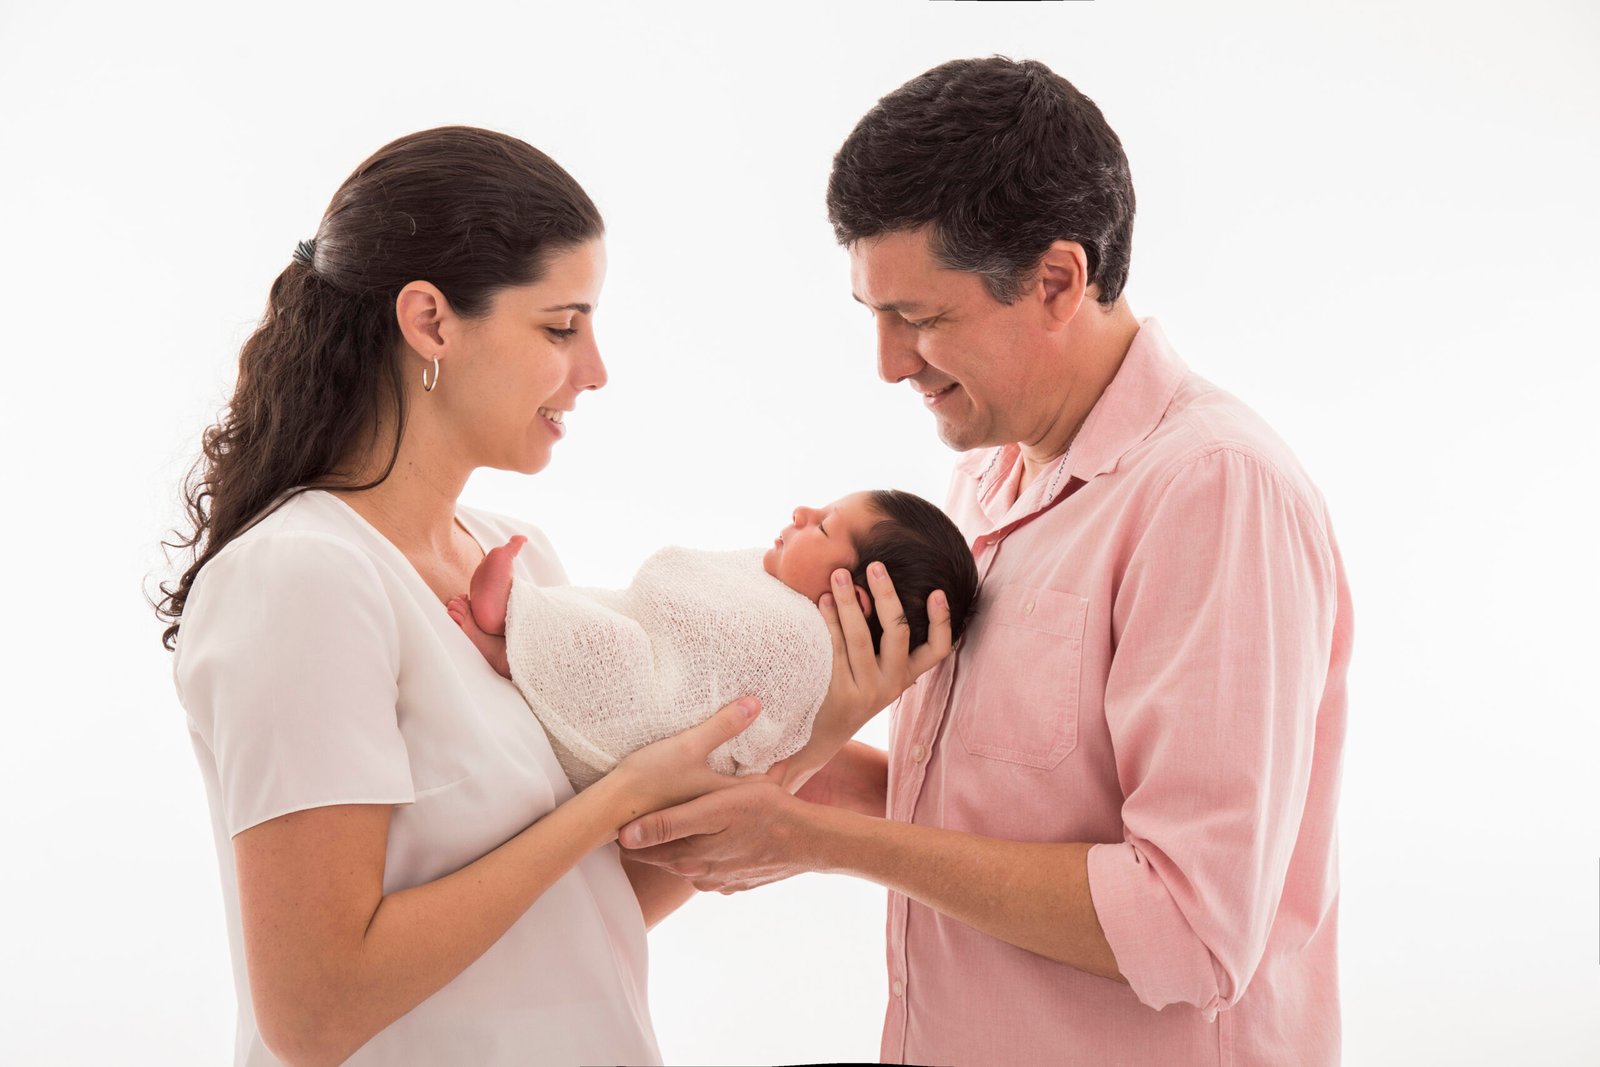 Provision For Maternity And Newborn Well-Being ( Health Insurance )